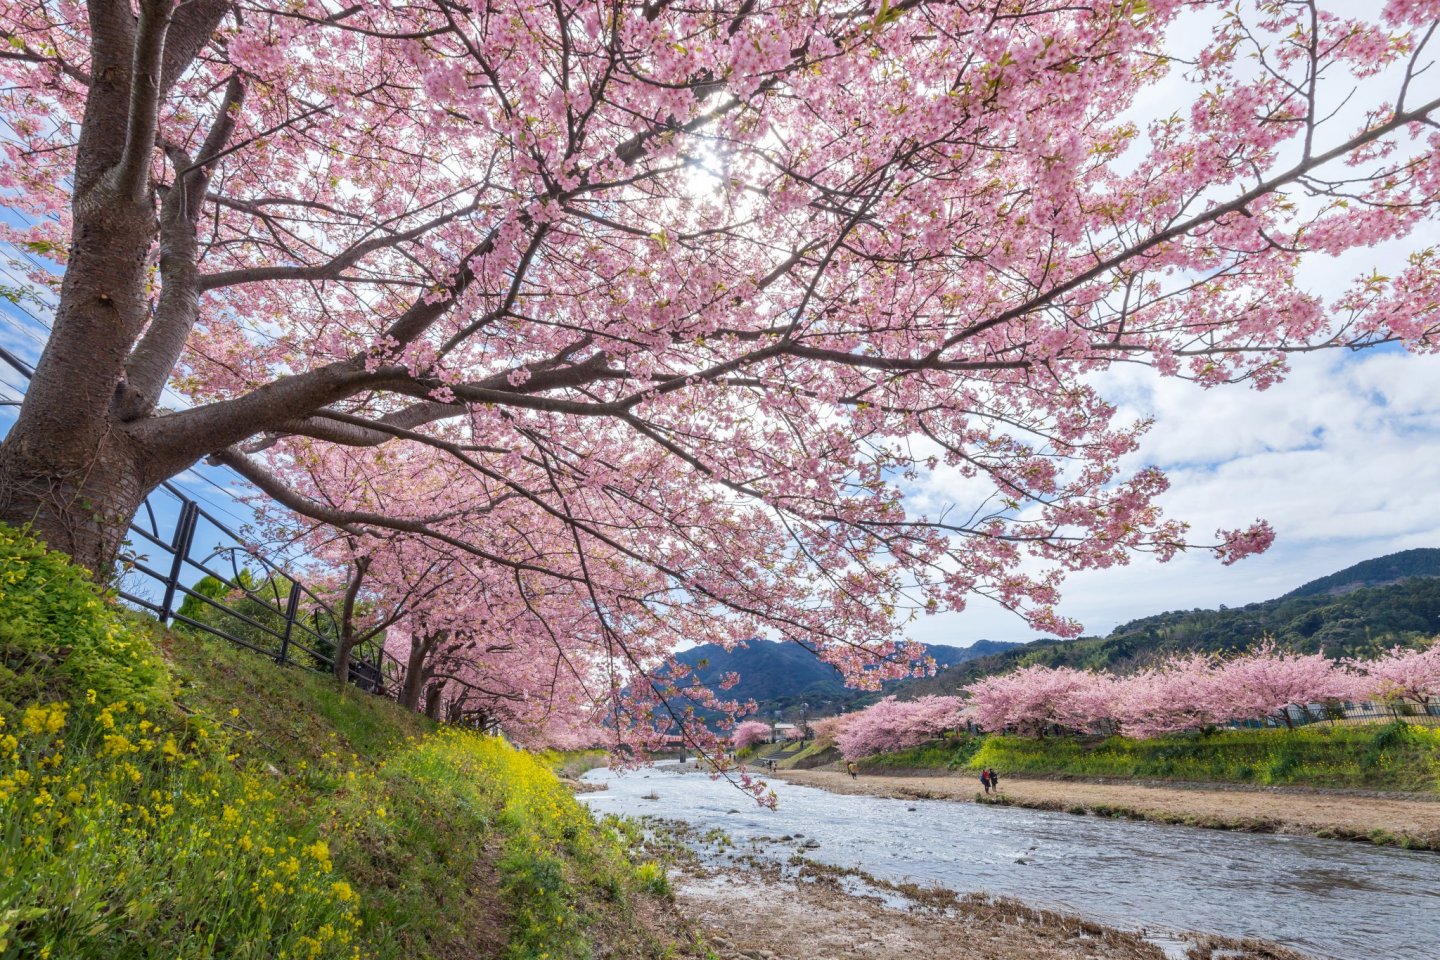 The Kawazu blossoms lined along the river are one of creation's finest spectacles.